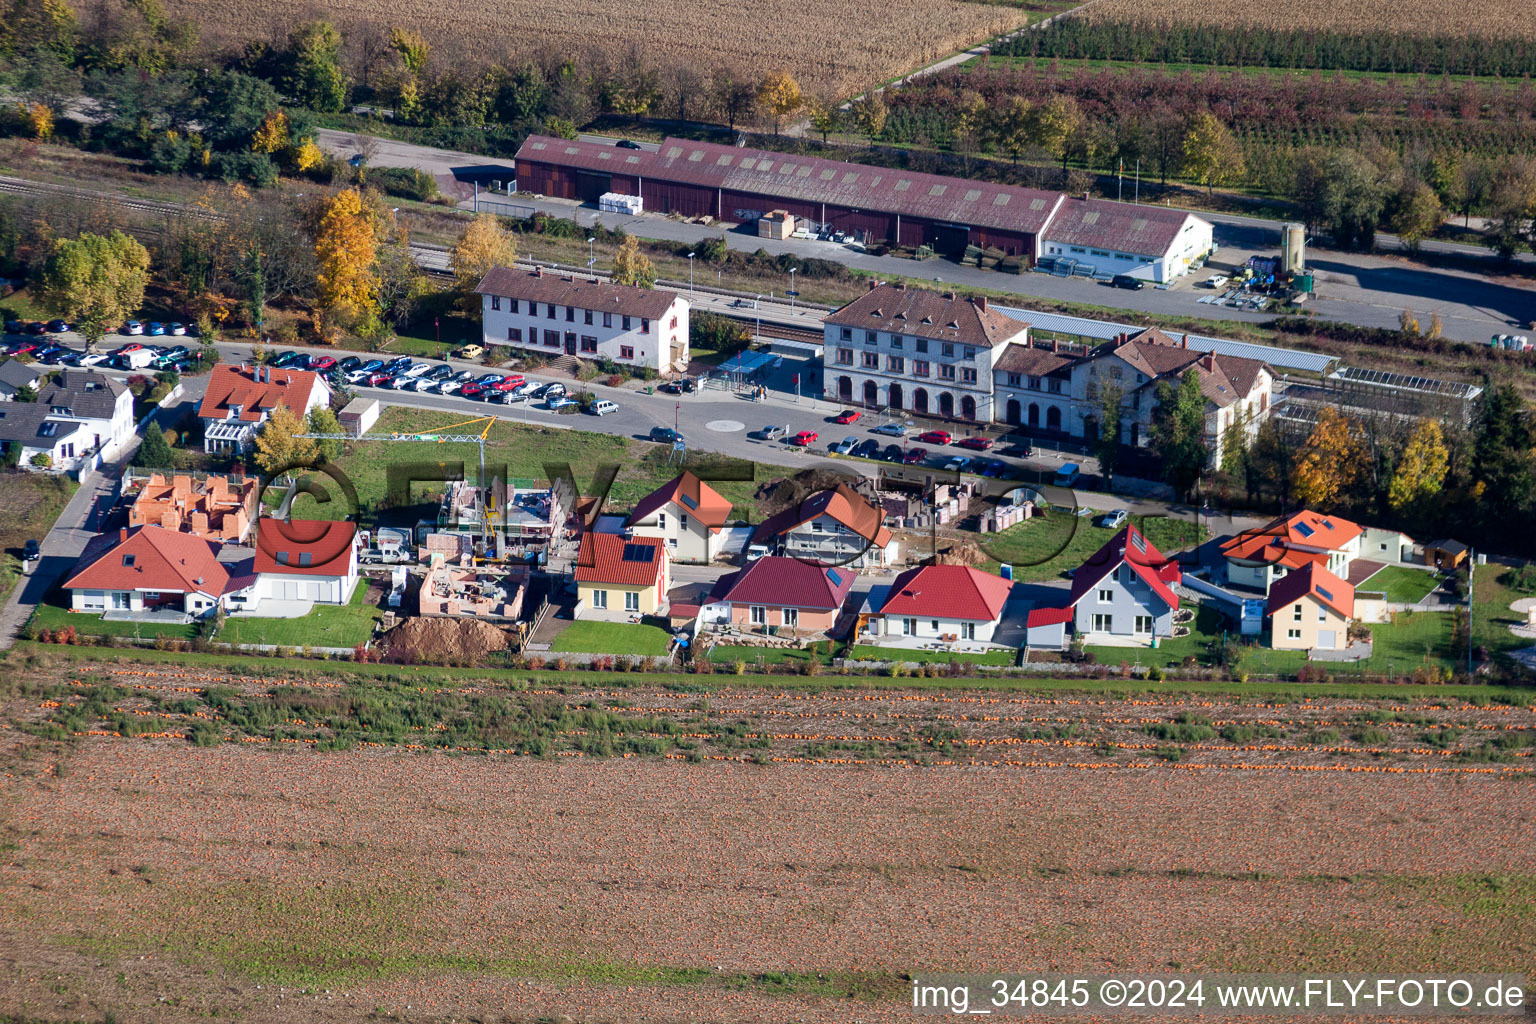 Aerial view of Station railway building of the Deutsche Bahn in Winden in the state Rhineland-Palatinate, Germany